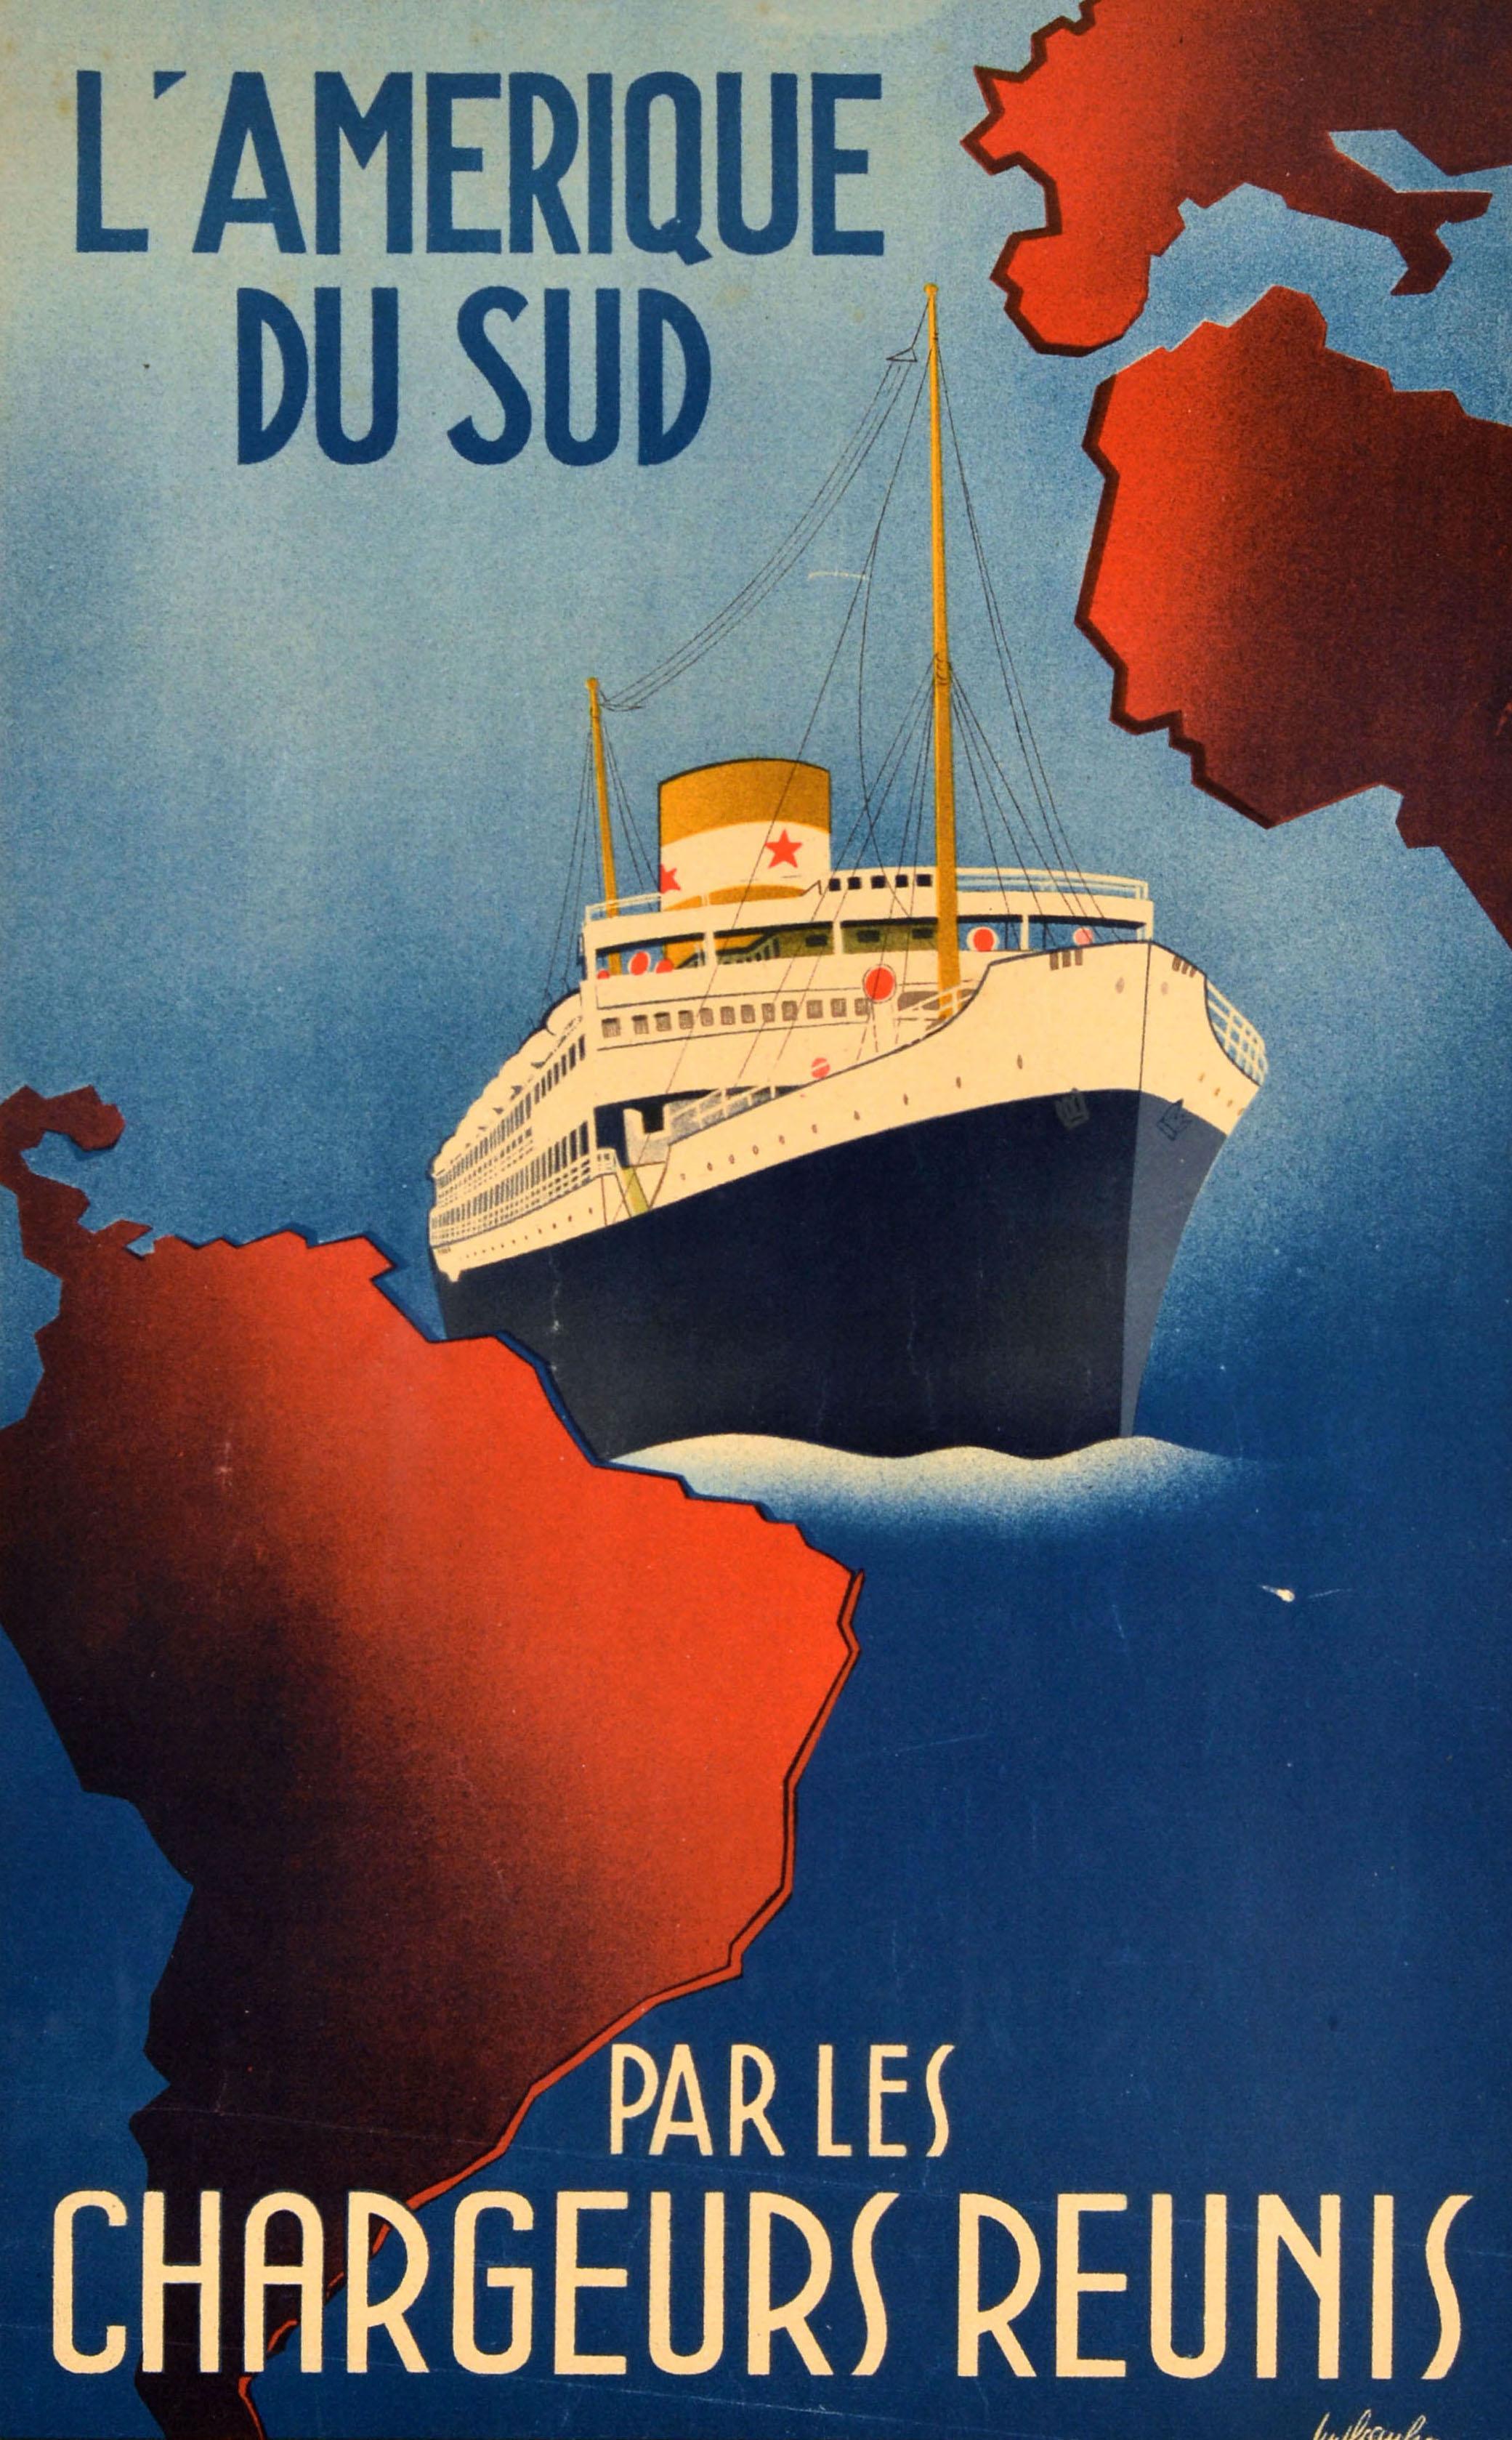 Original vintage cruise travel poster for South America by Chargeurs Reunis / L'Amerique Du Sud par les Chargeurs Reunis featuring a ship sailing on the Atlantic Ocean between map shapes of Europe and Africa on the right and South America on the